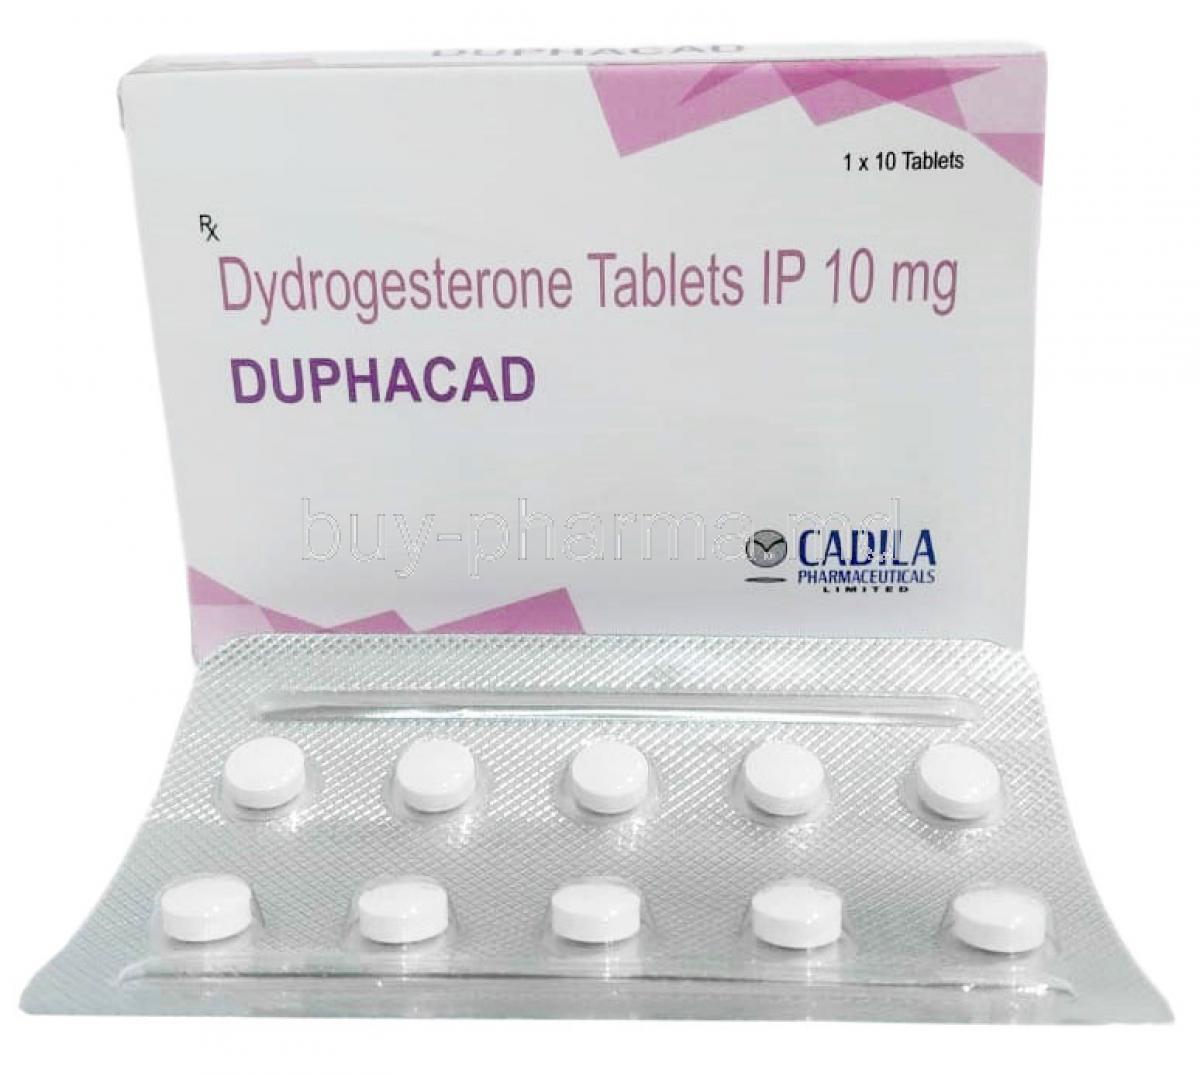 Duphacad, Dydrogesterone 10mg, Cadila Pharmaceuticals Ltd, Box front view, Blisterpack